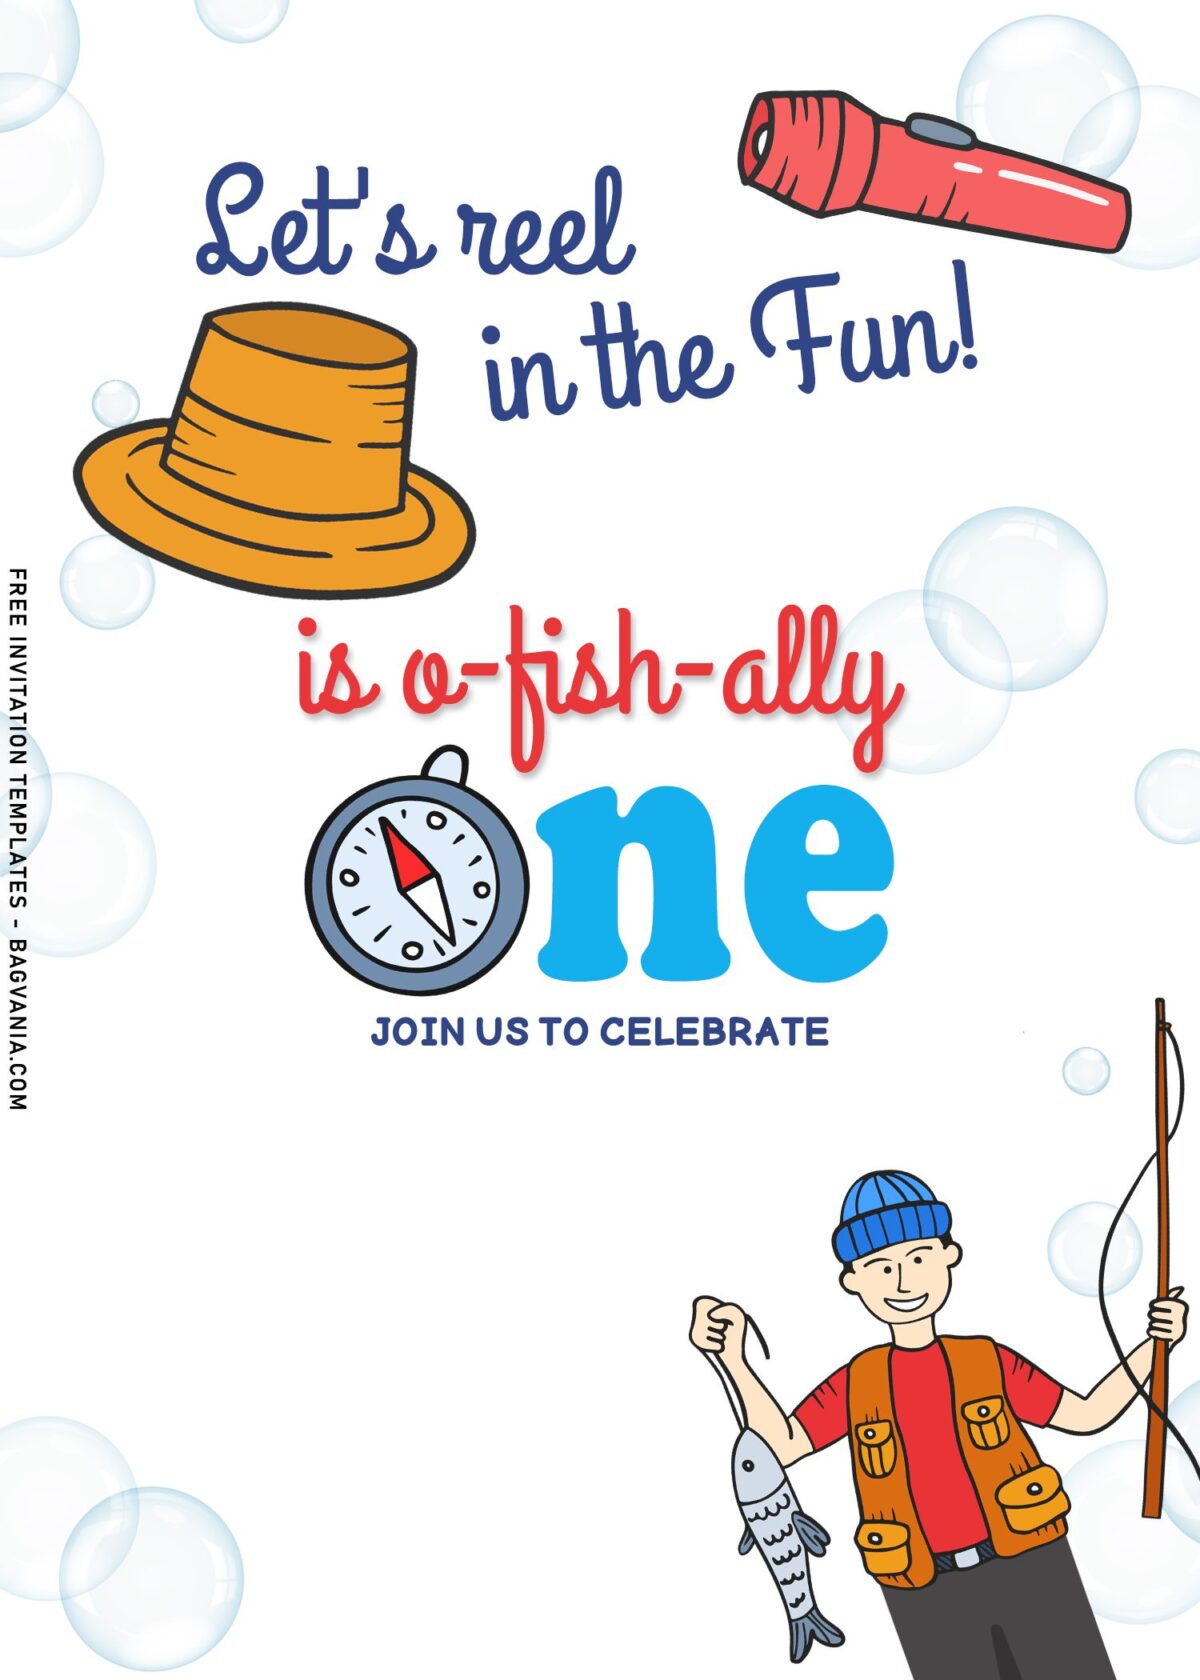 10+ Cute Fishing Birthday Invitation Templates For Your Little Fisherman with adorable cartoon fisherman